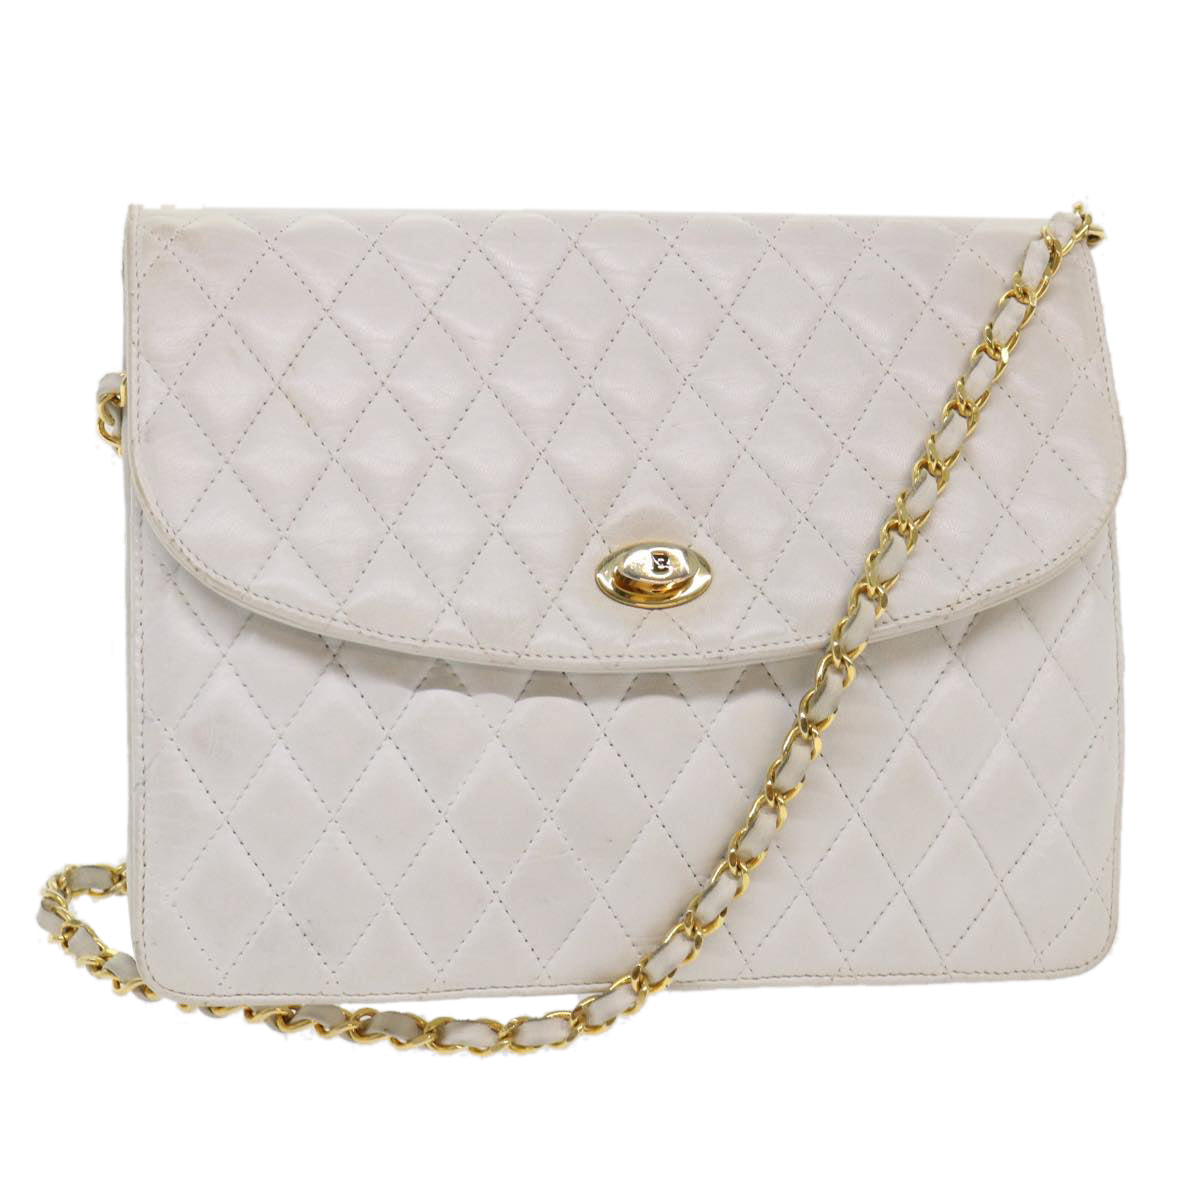 BALLY Chain Shoulder Bag Leather White Auth bs6558